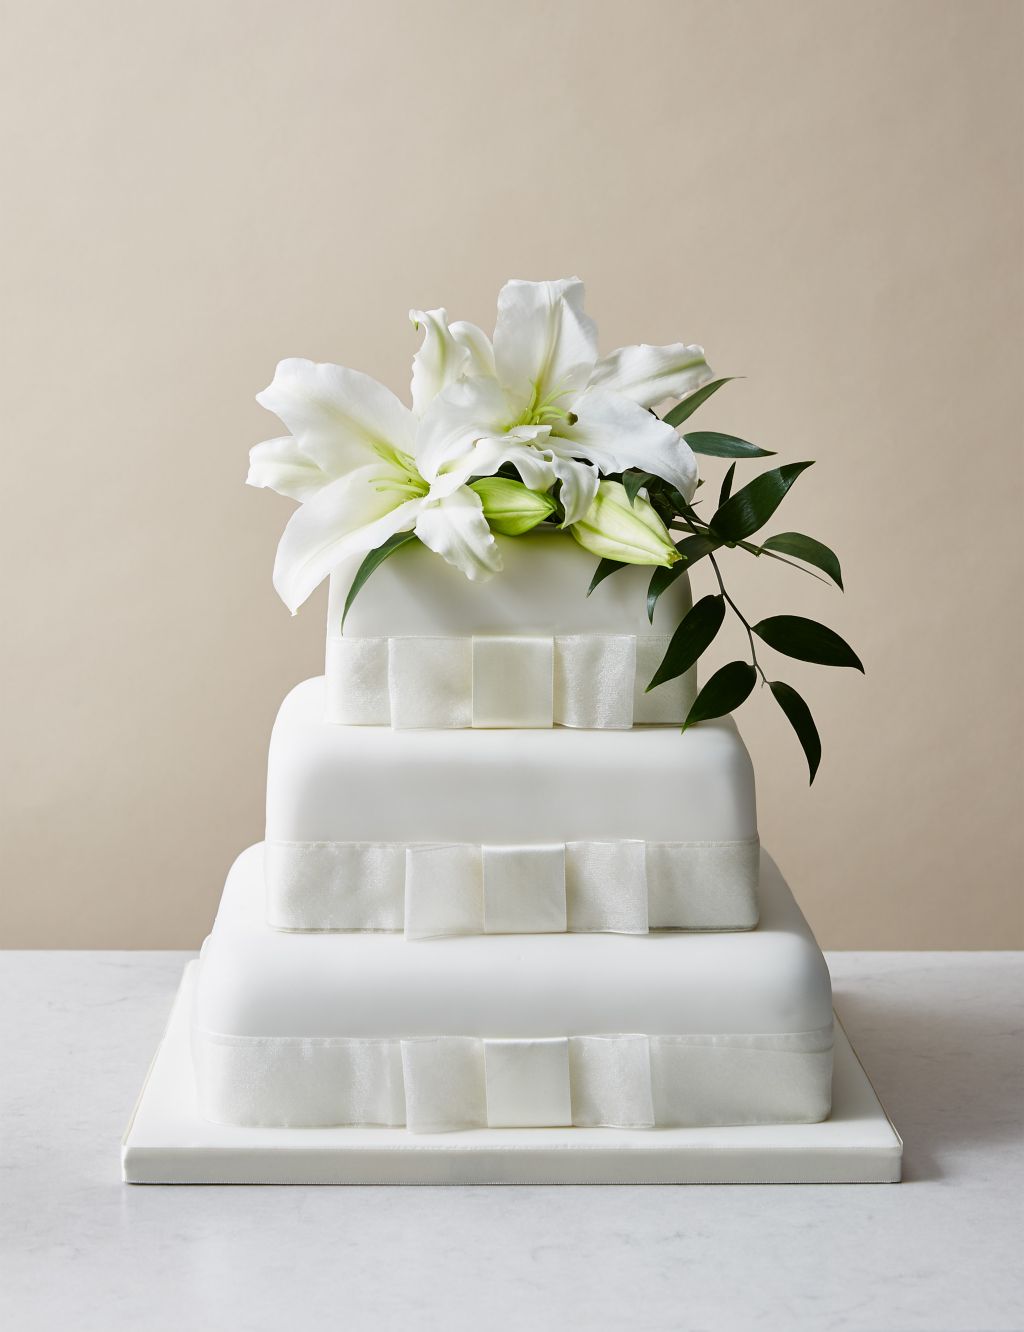 3 Tier Elegant Wedding Cake - Assorted Flavours with Lemon (Serves 190) Last order date 26th March 3 of 5